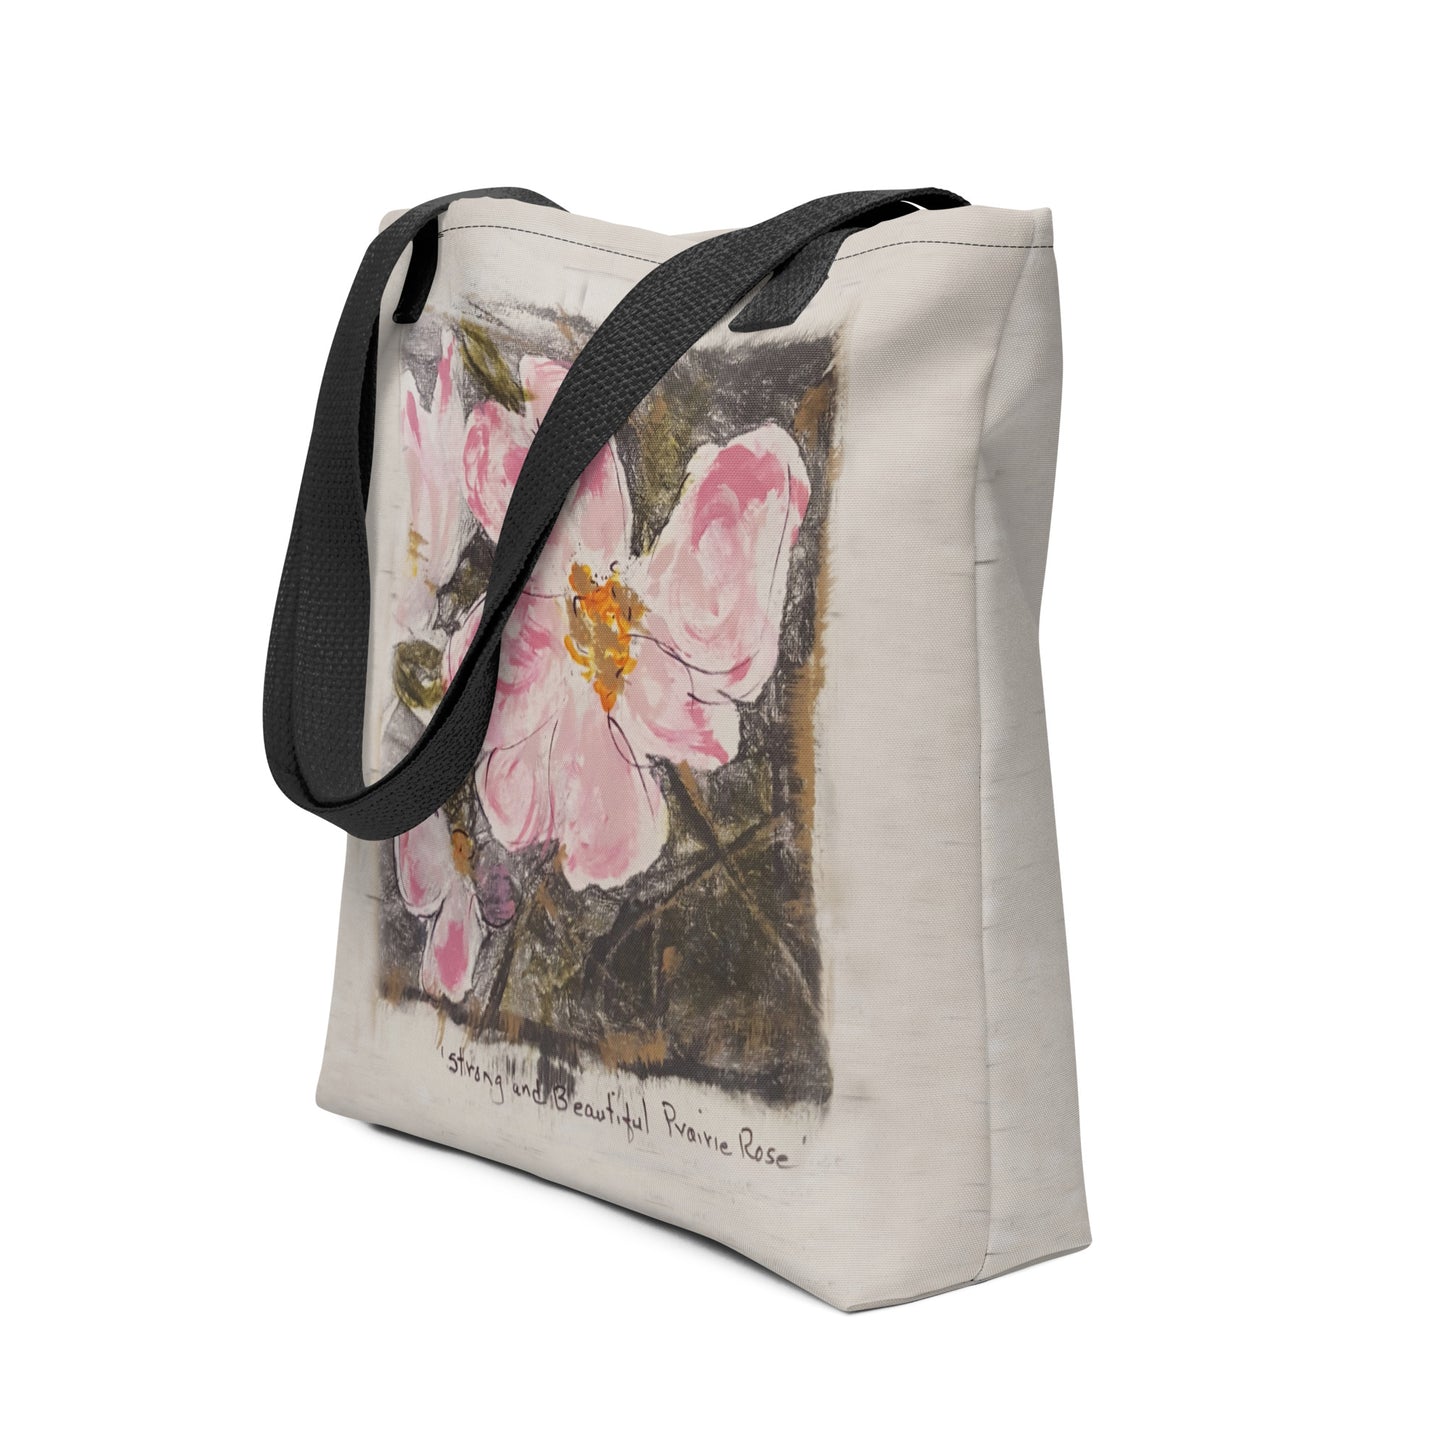 NEW! - Strong and Beautiful Prairie Rose - Artful Tote